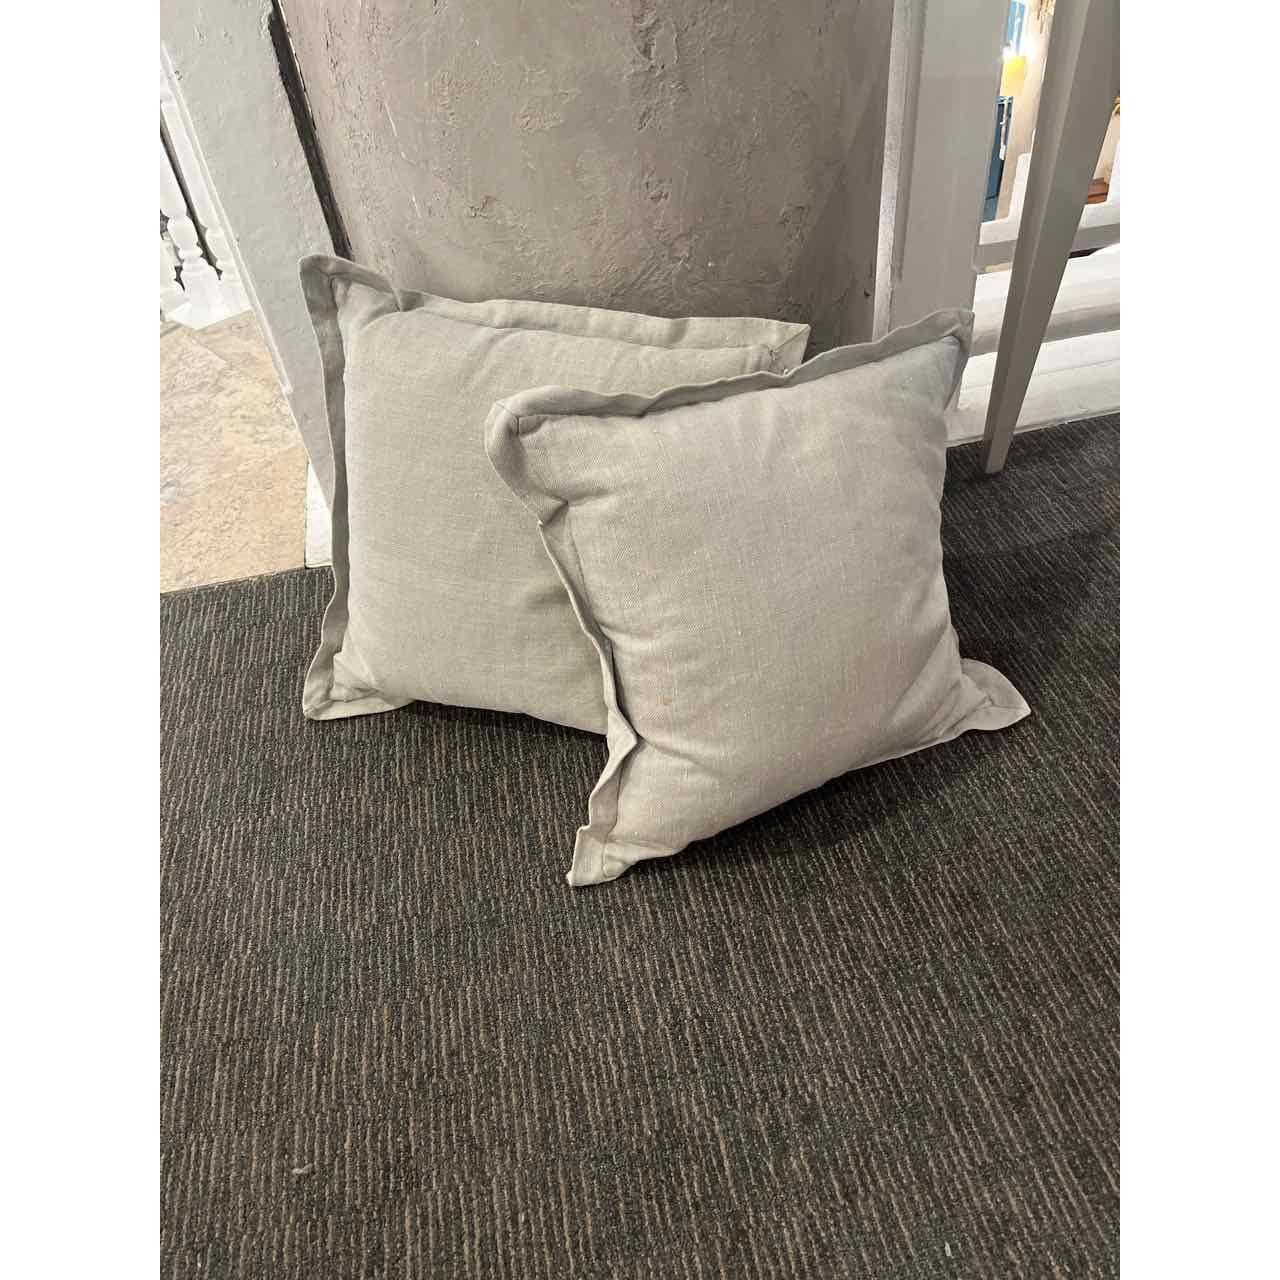 Pair of Grey Flanged Pillows w/down and feather fill